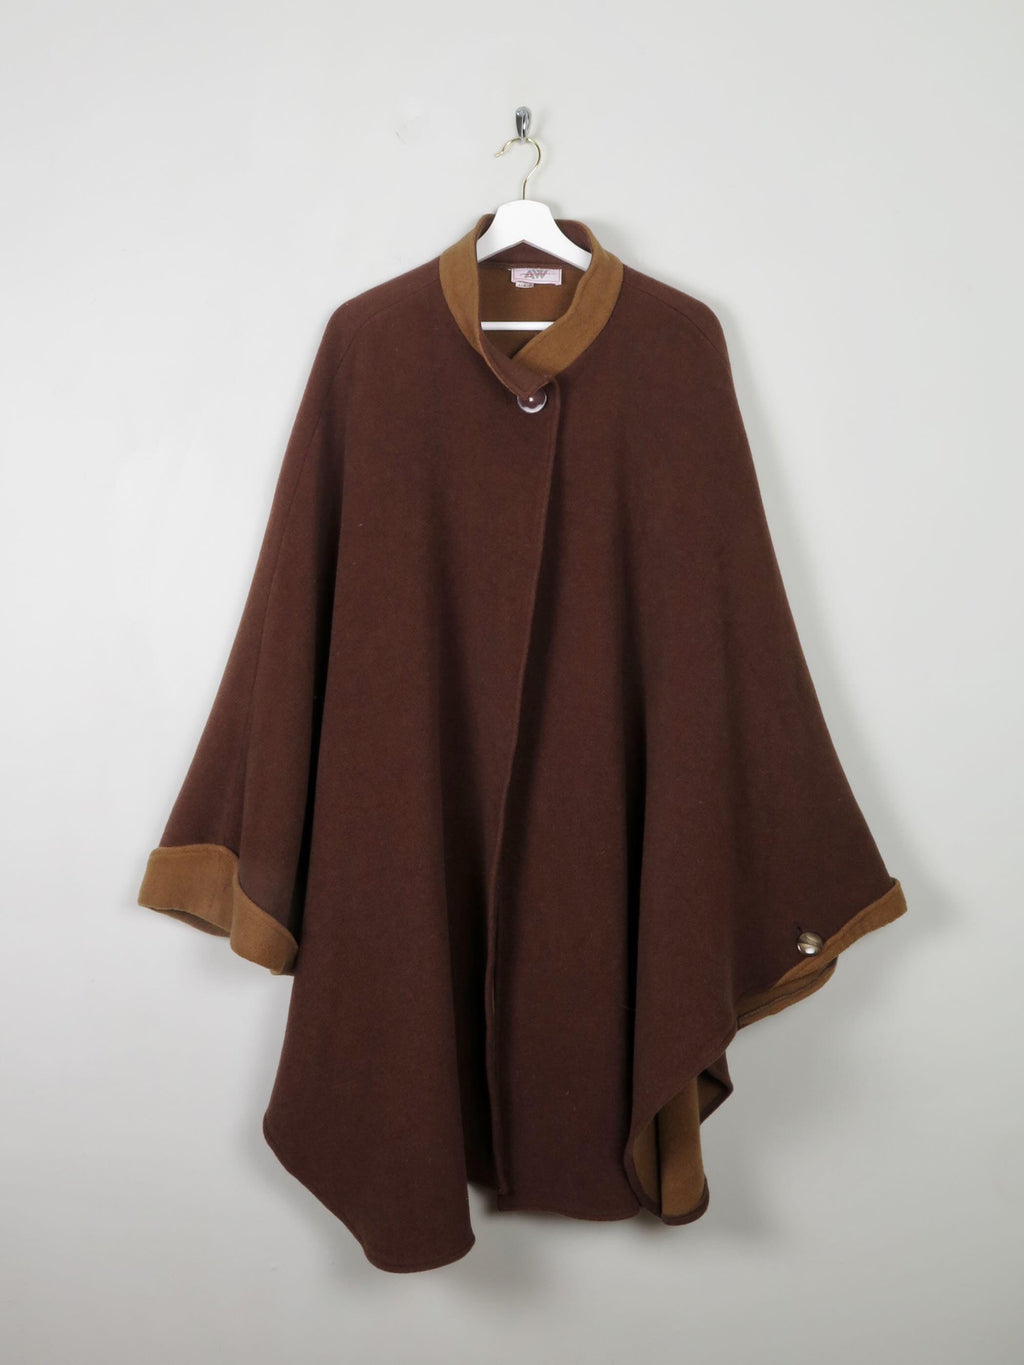 Women's Vintage Brown Wool Cape M-XL - The Harlequin